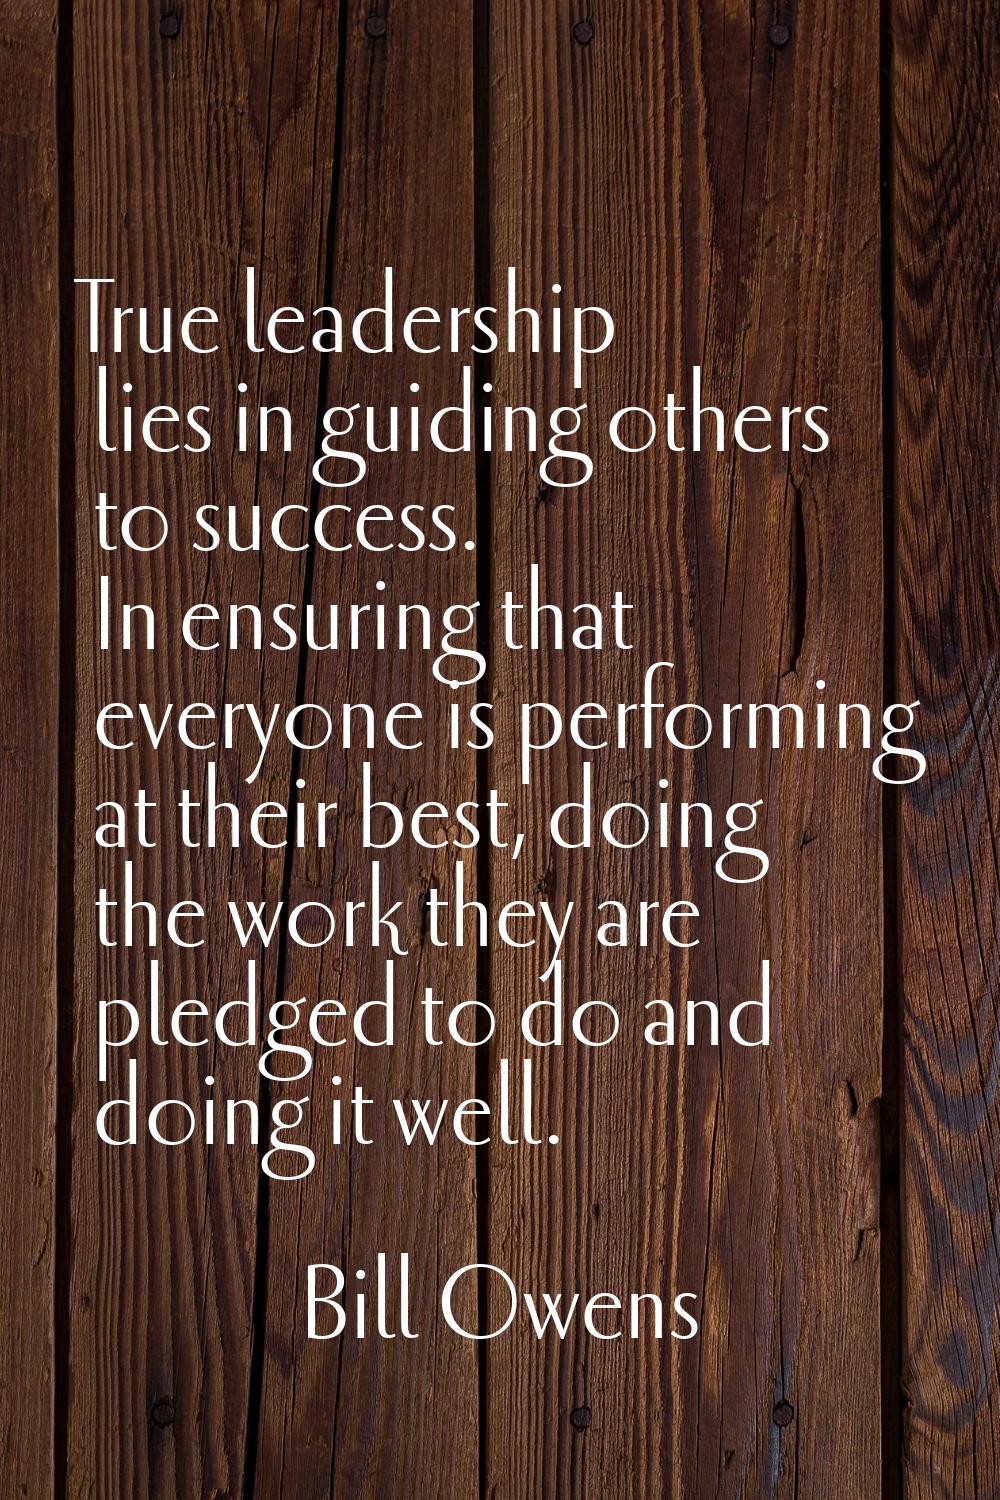 True leadership lies in guiding others to success. In ensuring that everyone is performing at their